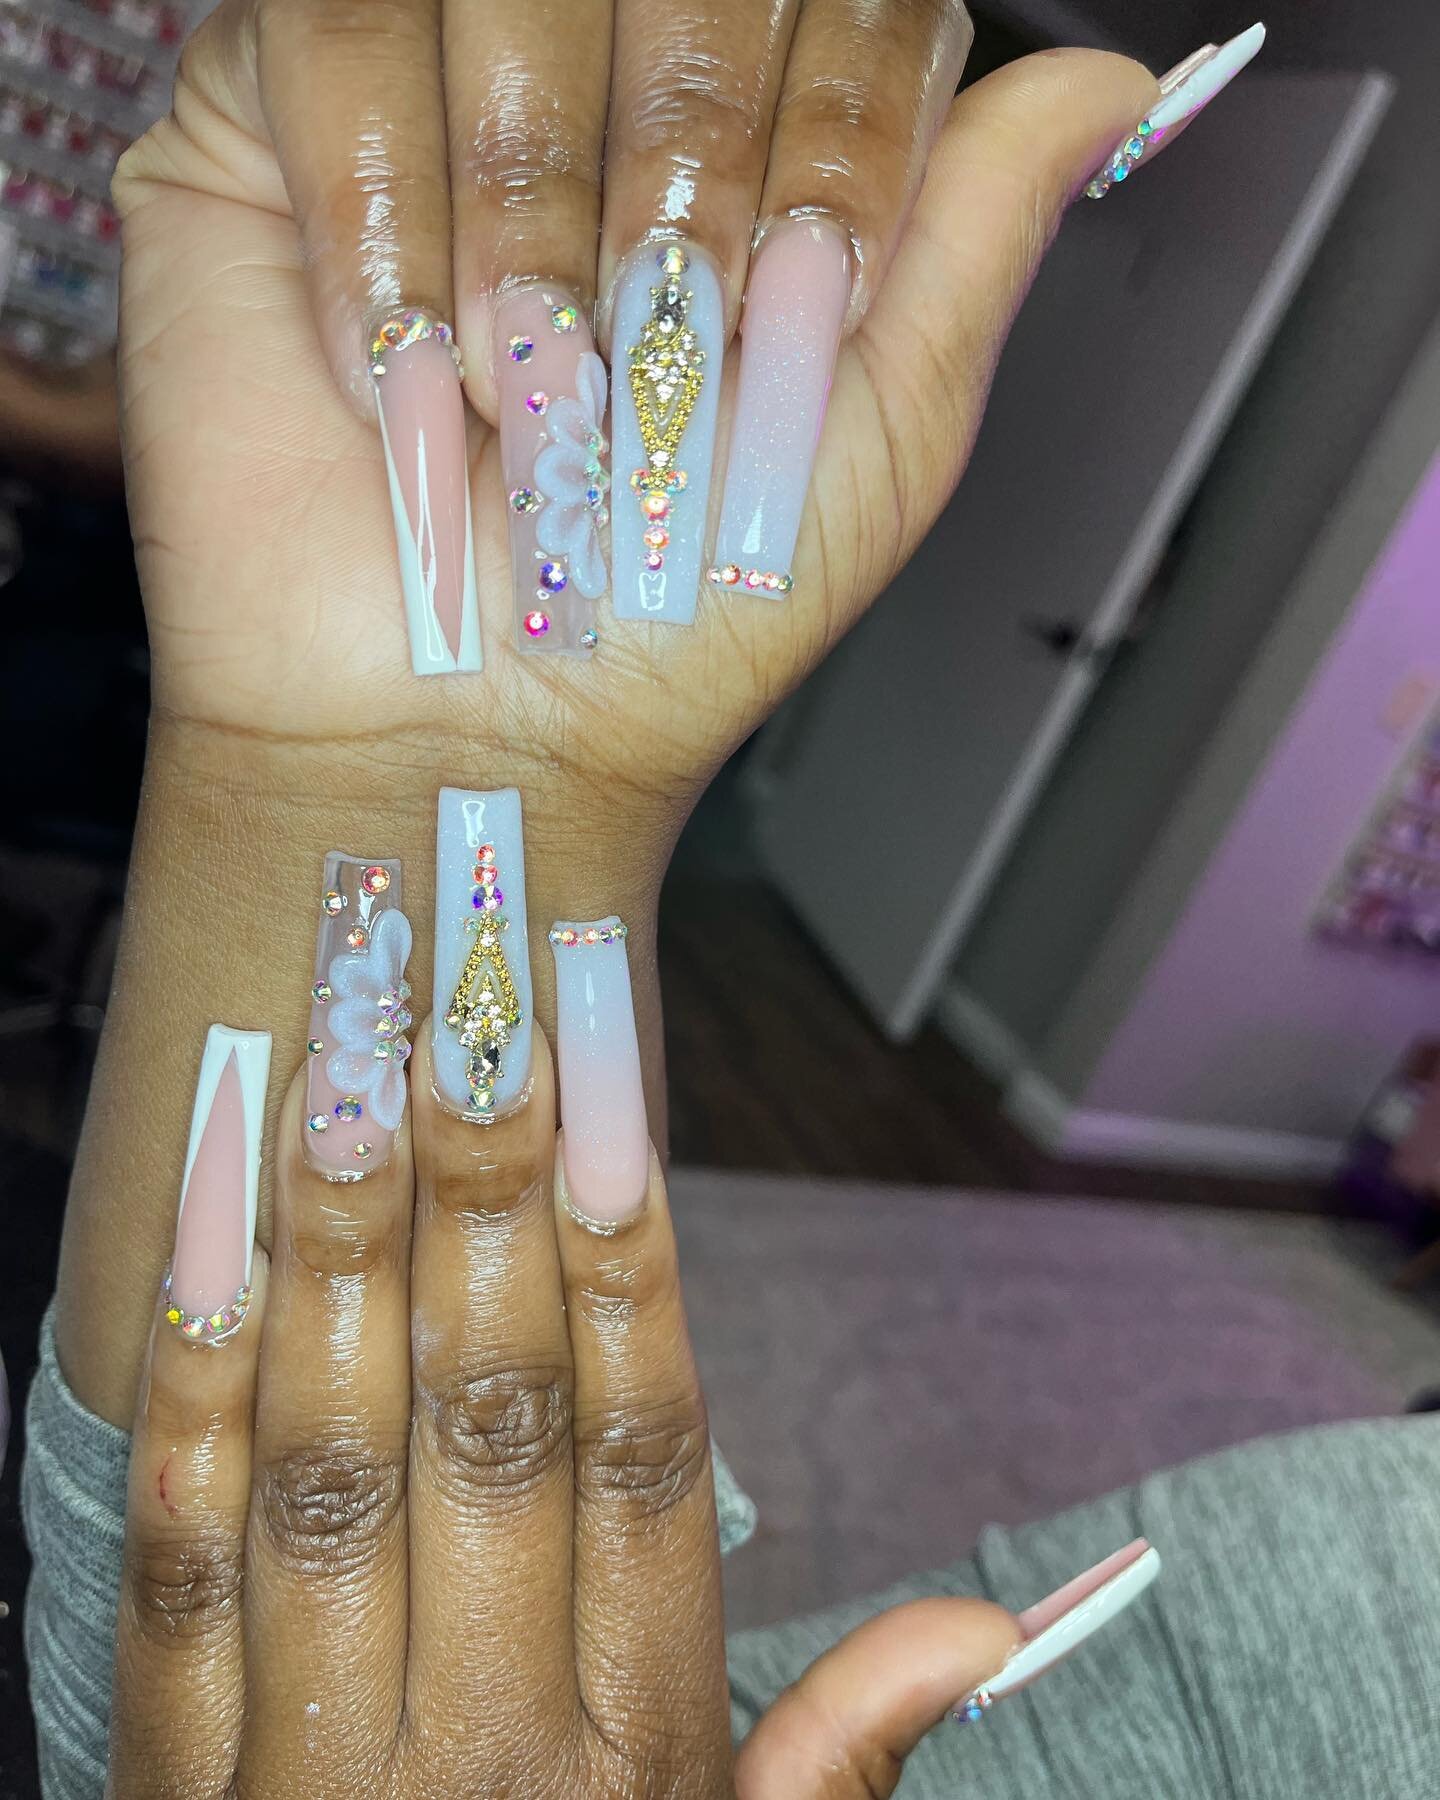 Diamonds are a girls best friend 😍
Nail set: full set with design 
Nail tech: @nailsbyarica_ 
www.LibertyBeauty.com
&ldquo;Experience the difference &ldquo;
&bull;
&bull;
&bull;
#libertybeautyfortwayne #libertybeauty 
#lbedgecontrol #lbessentials #f